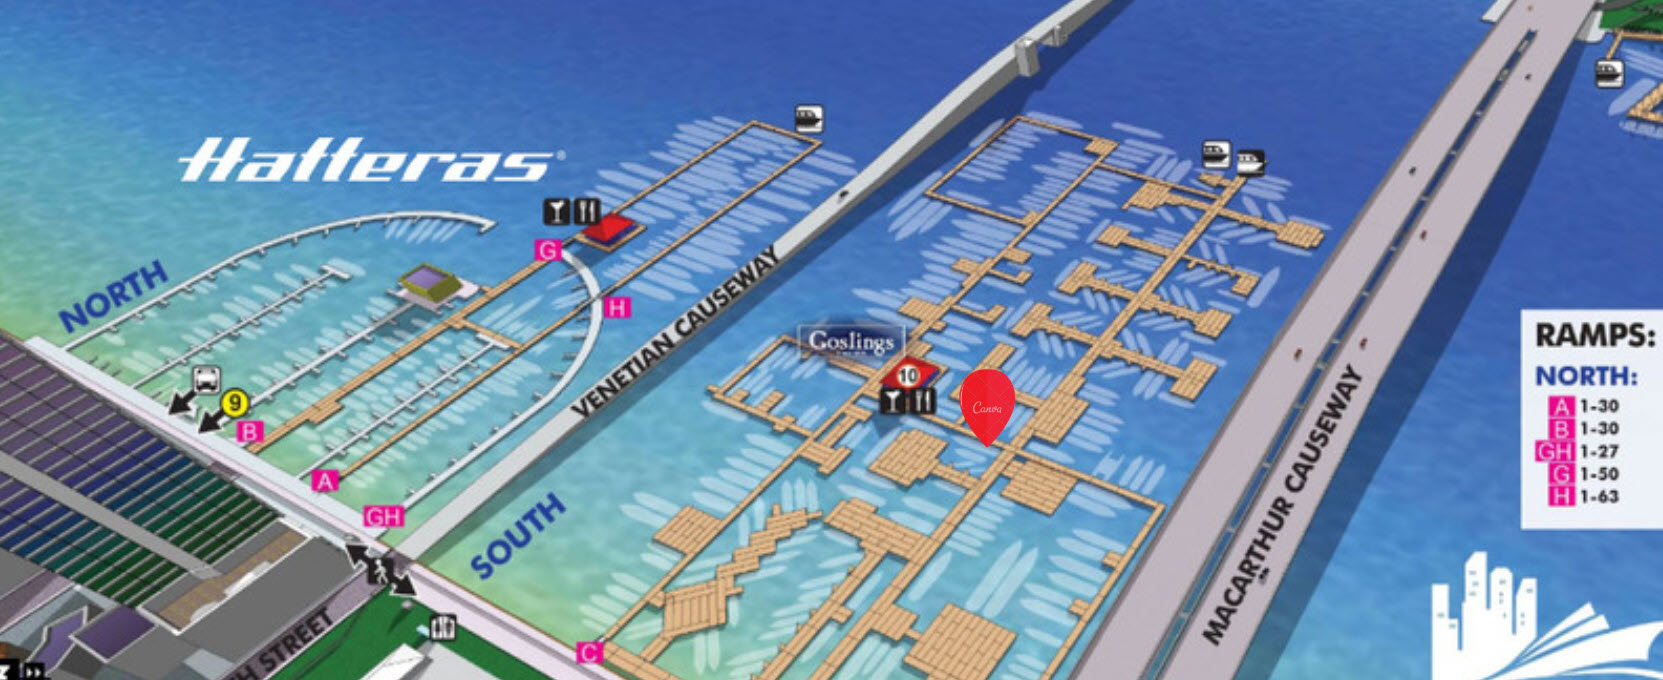 map of miami yacht show hatteras display